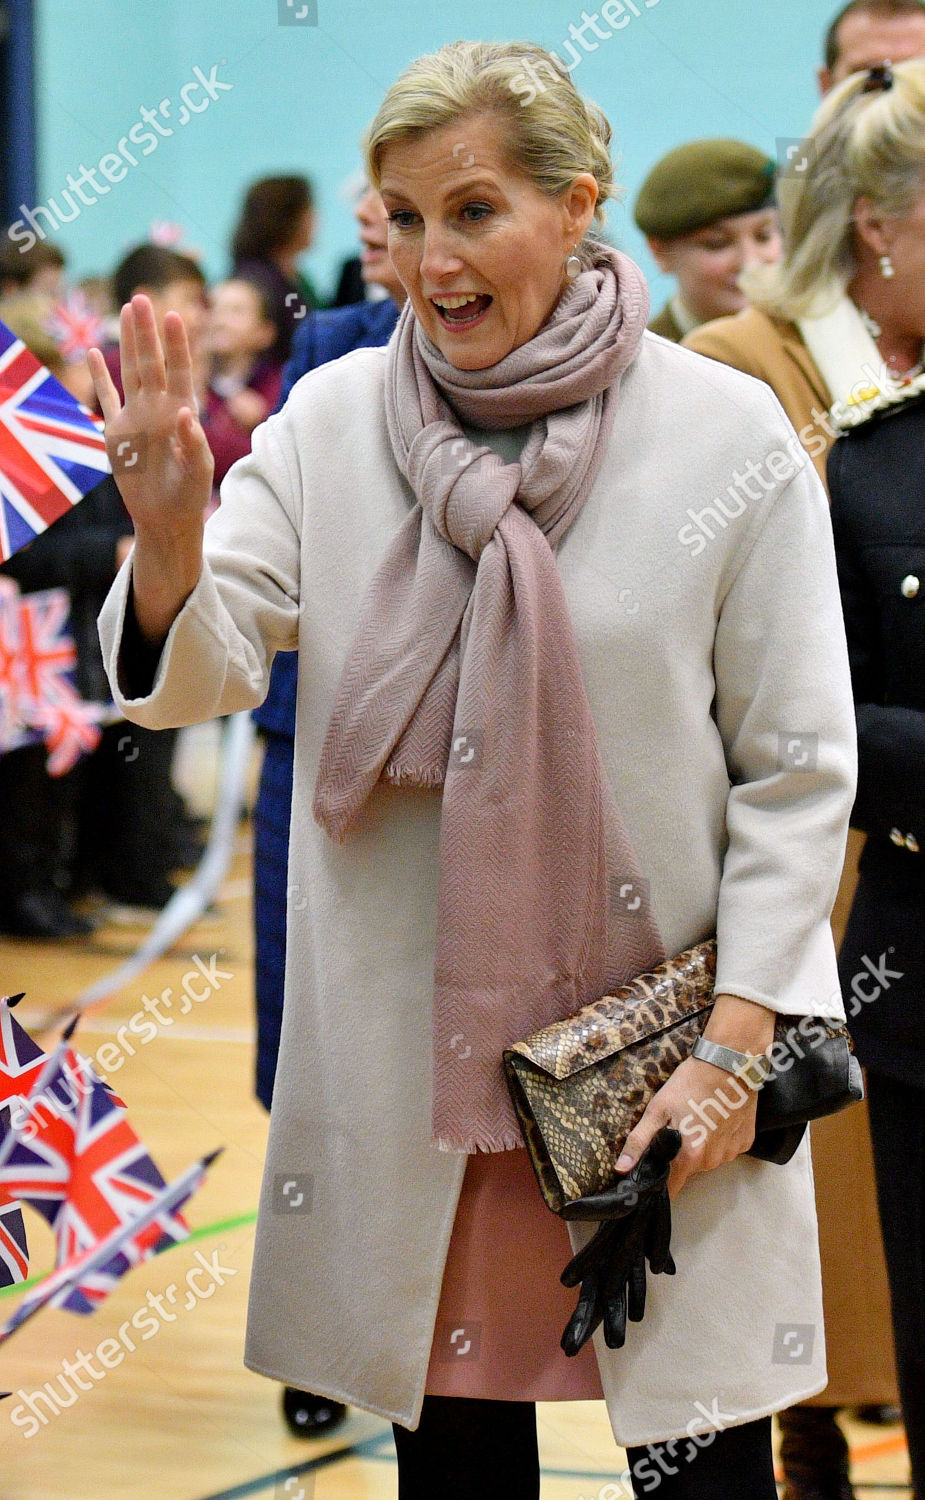 sophie-countess-of-wessex-visit-to-alfreton-uk-shutterstock-editorial-9988163e.jpg